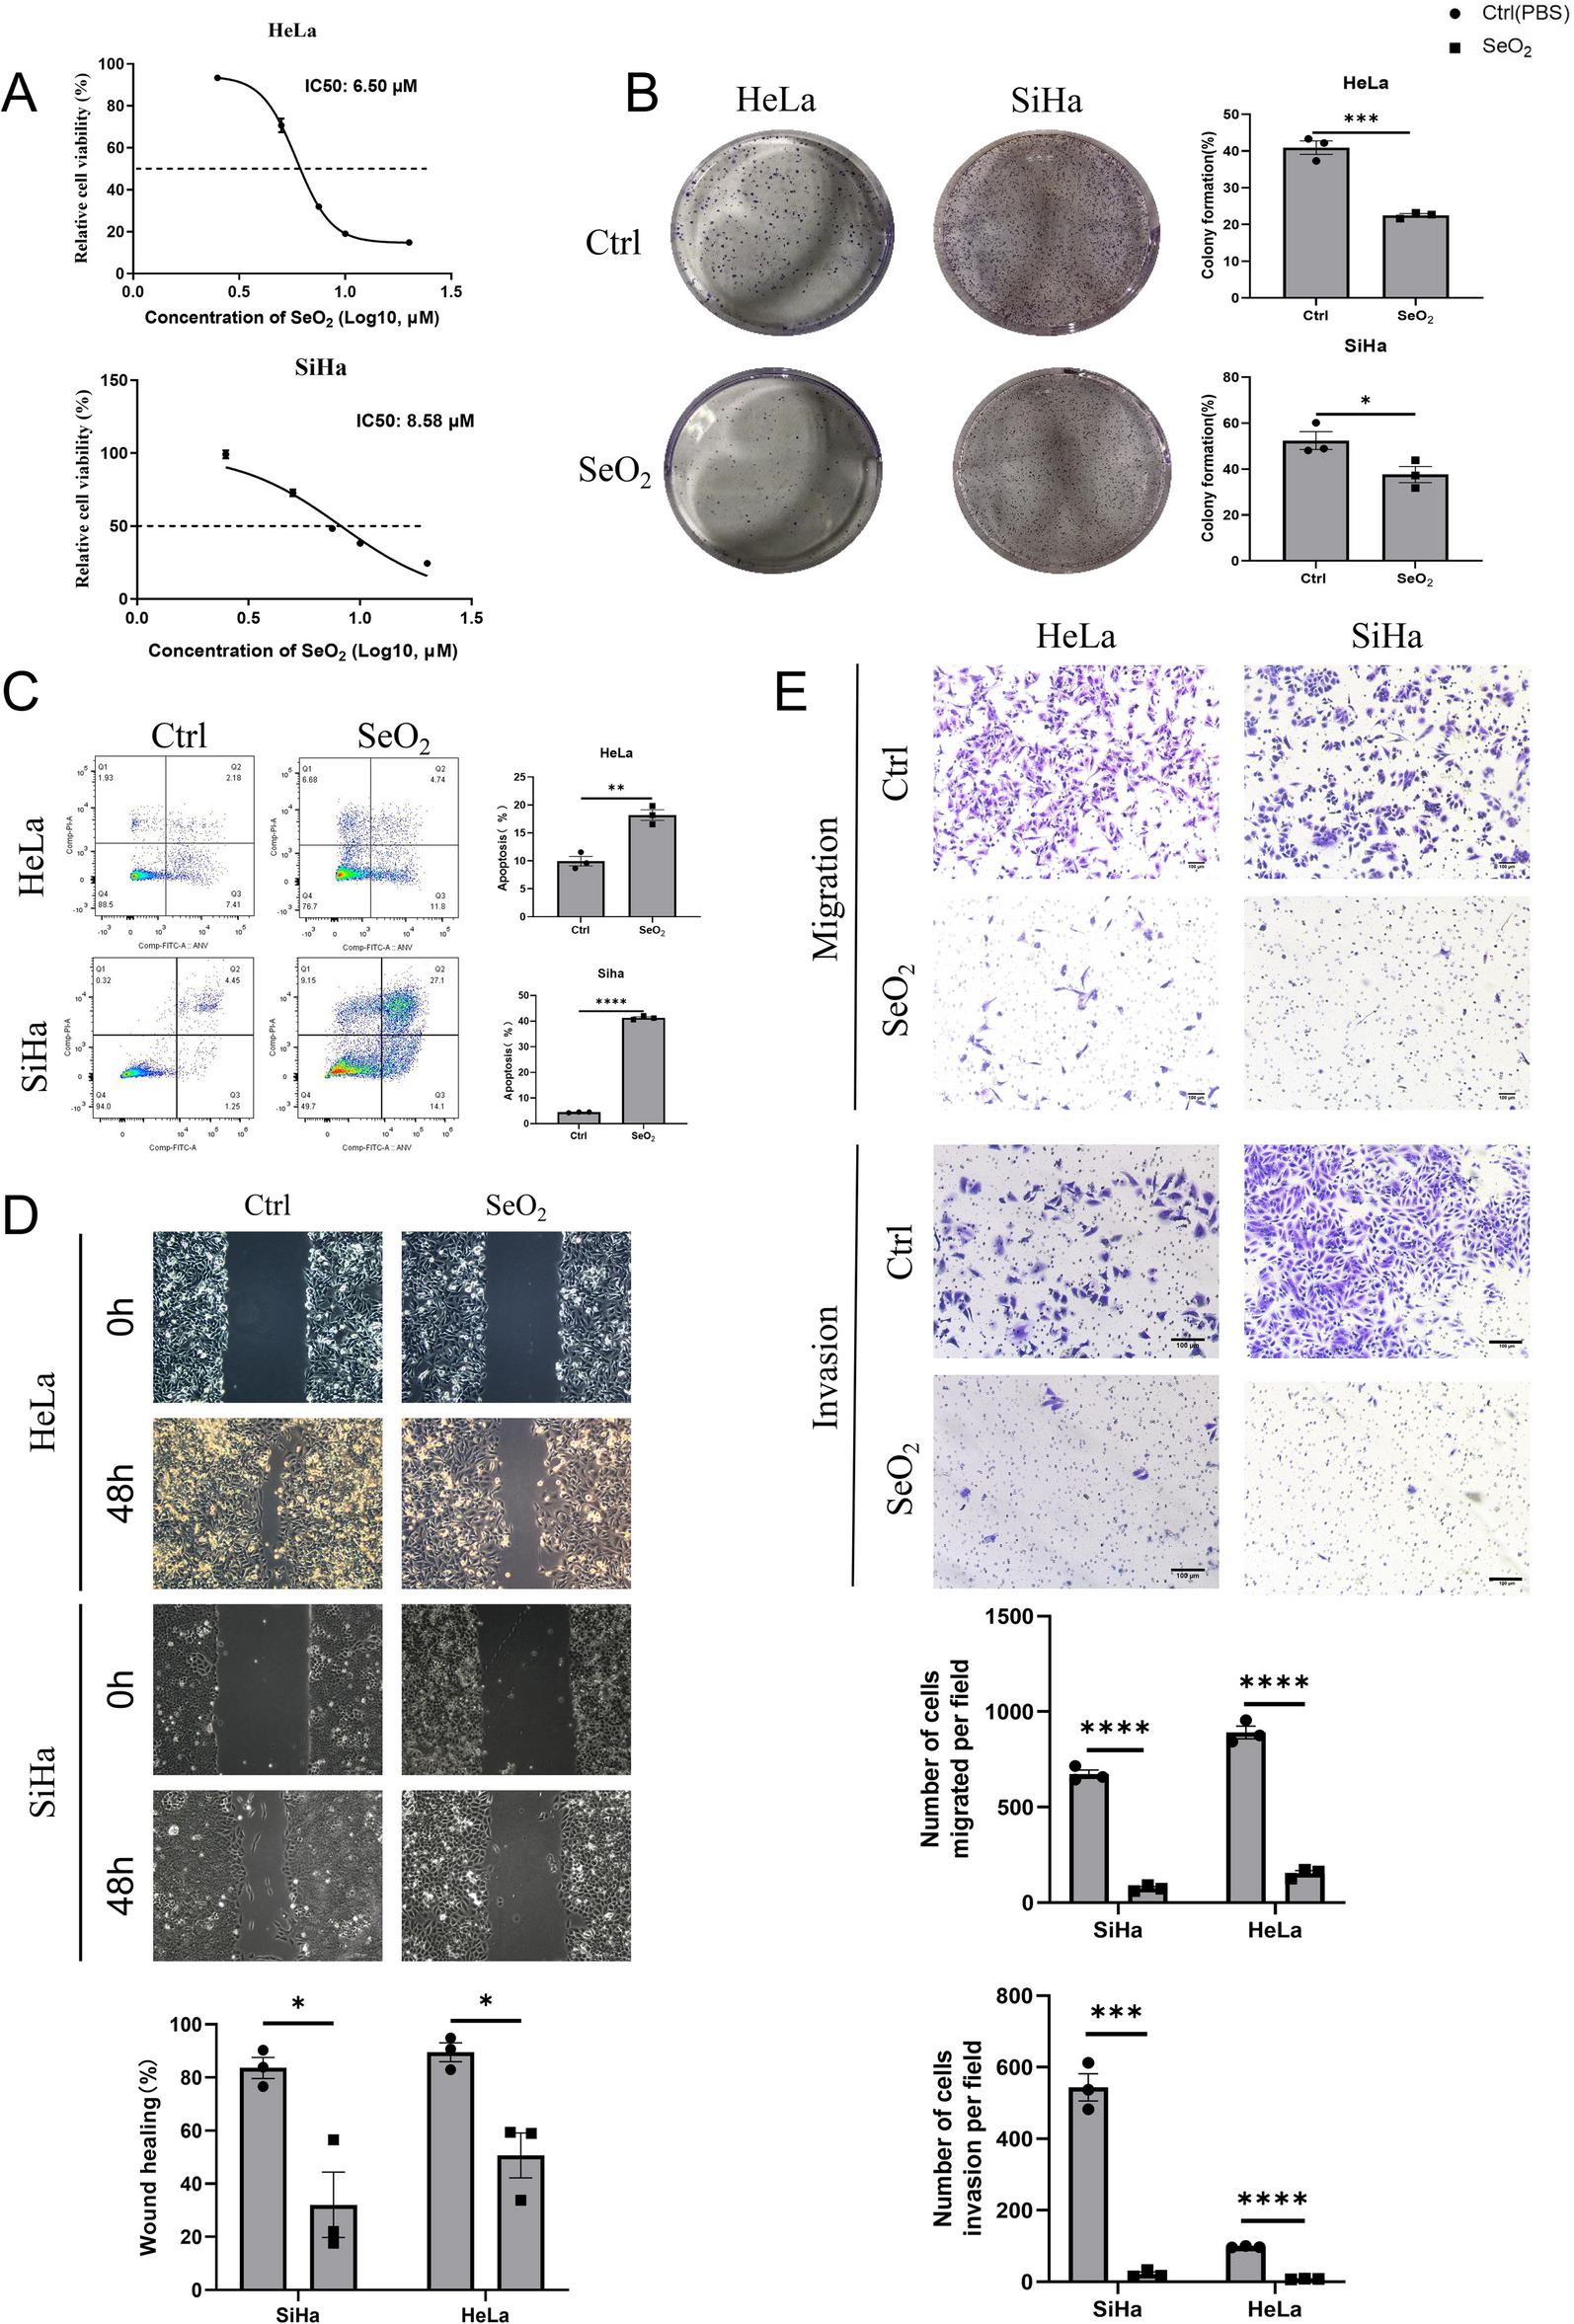 Targeting histone demethylases JMJD3 and UTX: selenium as a potential therapeutic agent for cervical cancer